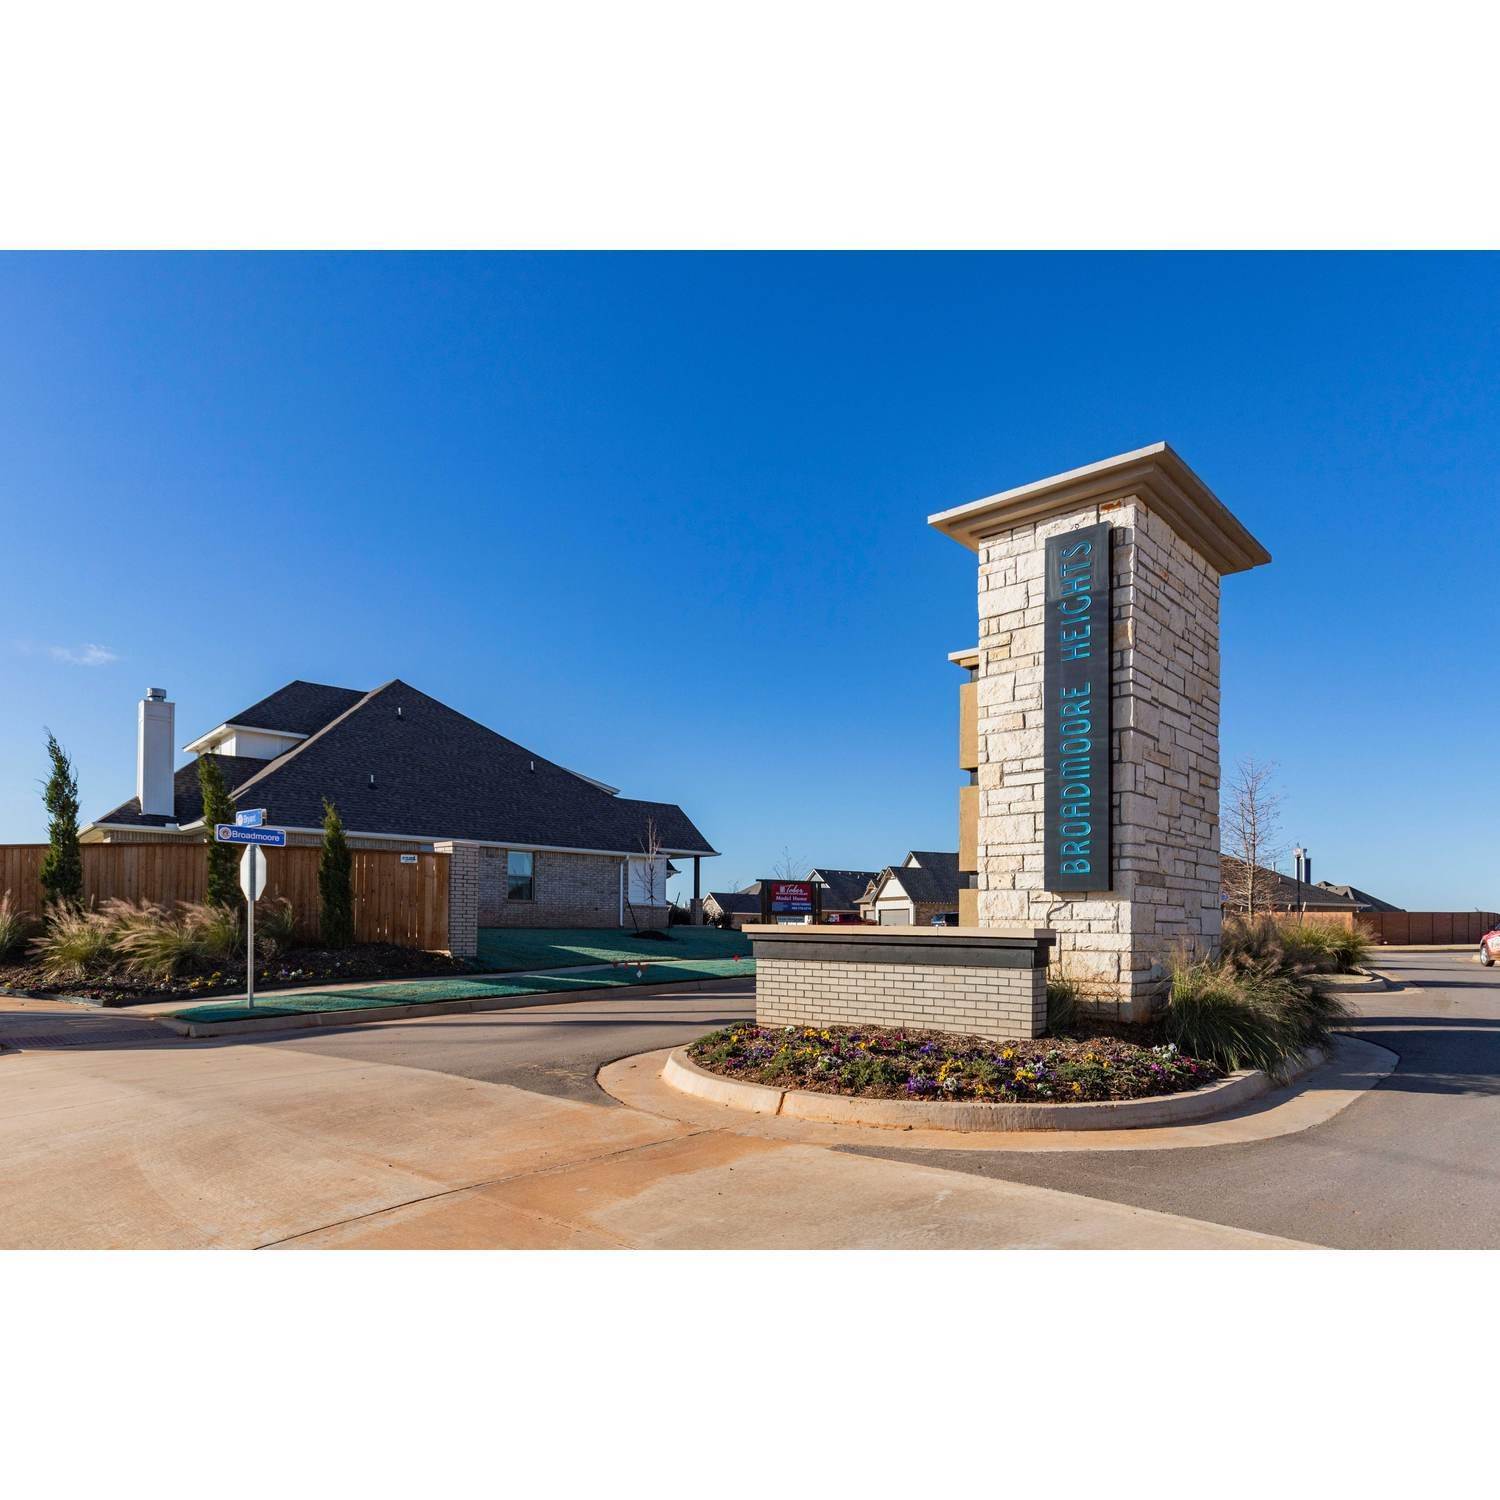 7. Broadmoore Heights building at 2800 Heather Haven, Moore, OK 73160